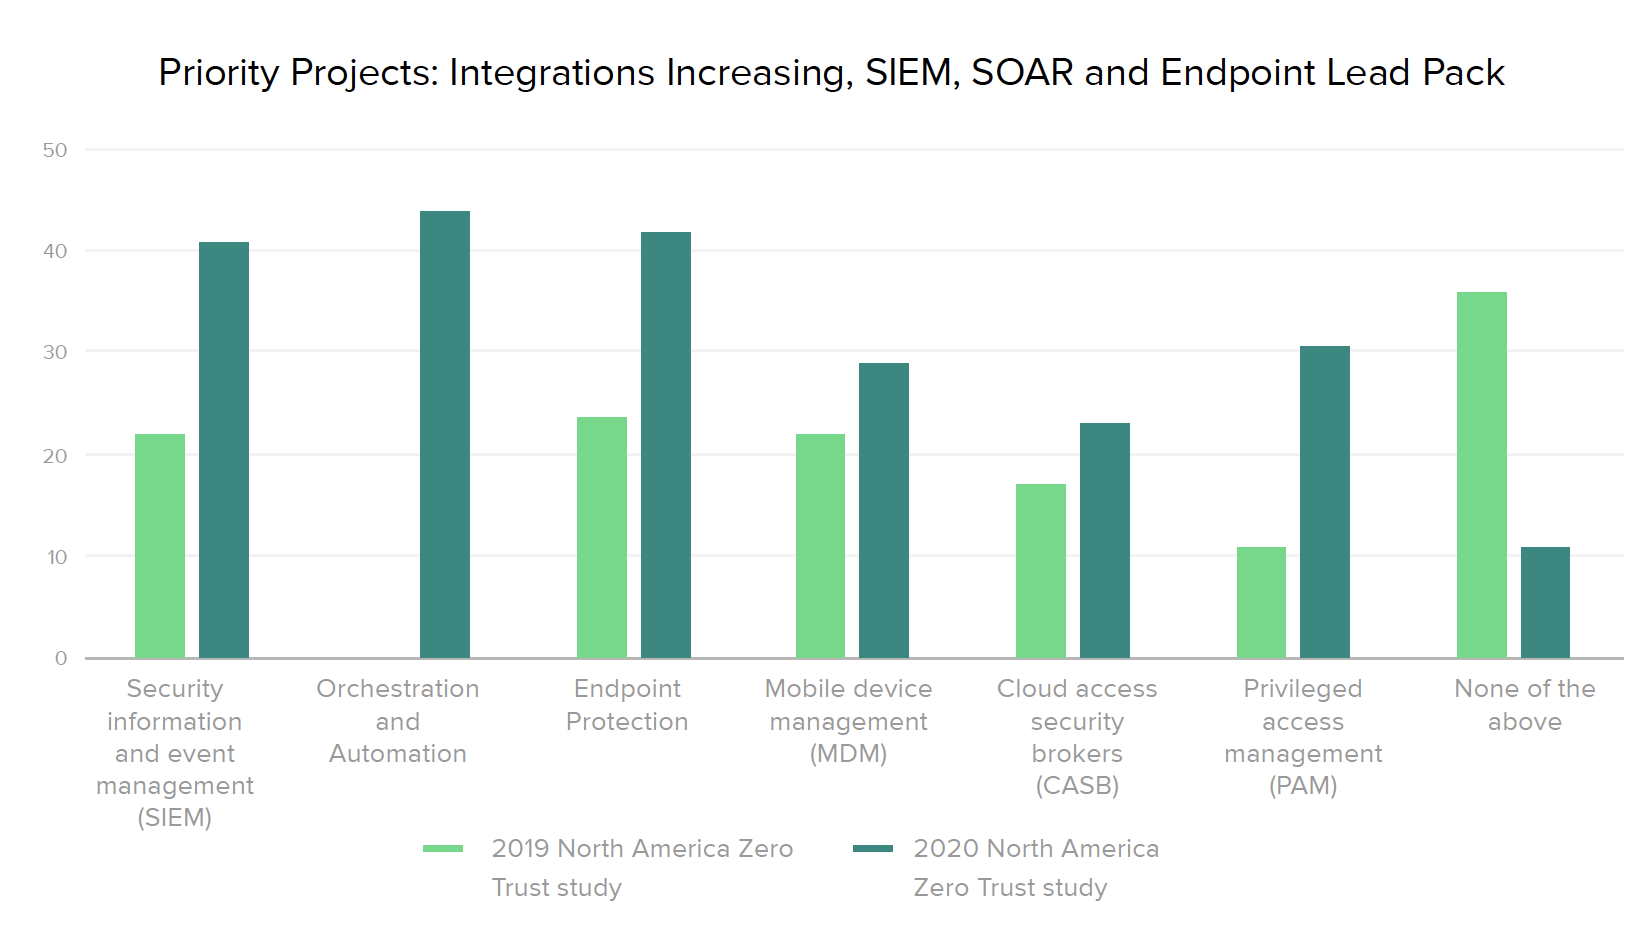 Priority Projects: Integrations Increasing, SIEM, SOAR and Endpoint Lead Pack